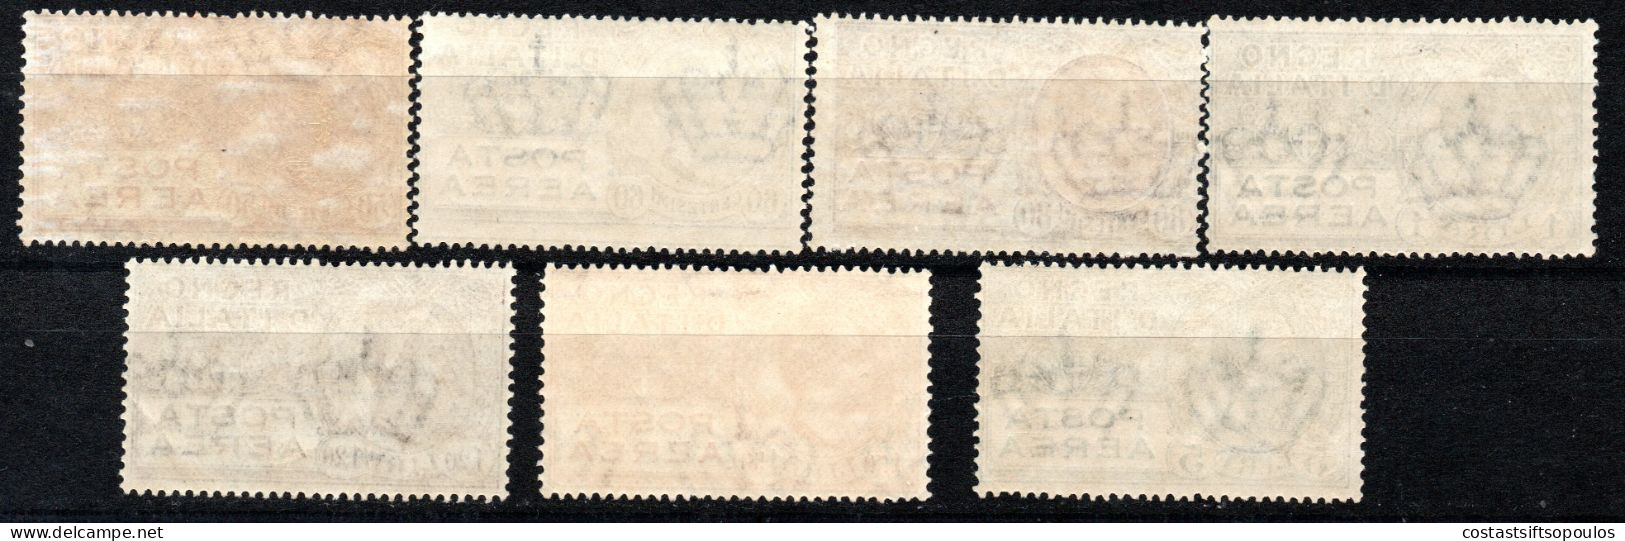 2795. 1.ITALY,1926-1928 #3-9 AIRMAIL SET,MNH,VERY FRESH,KING - Luchtpost